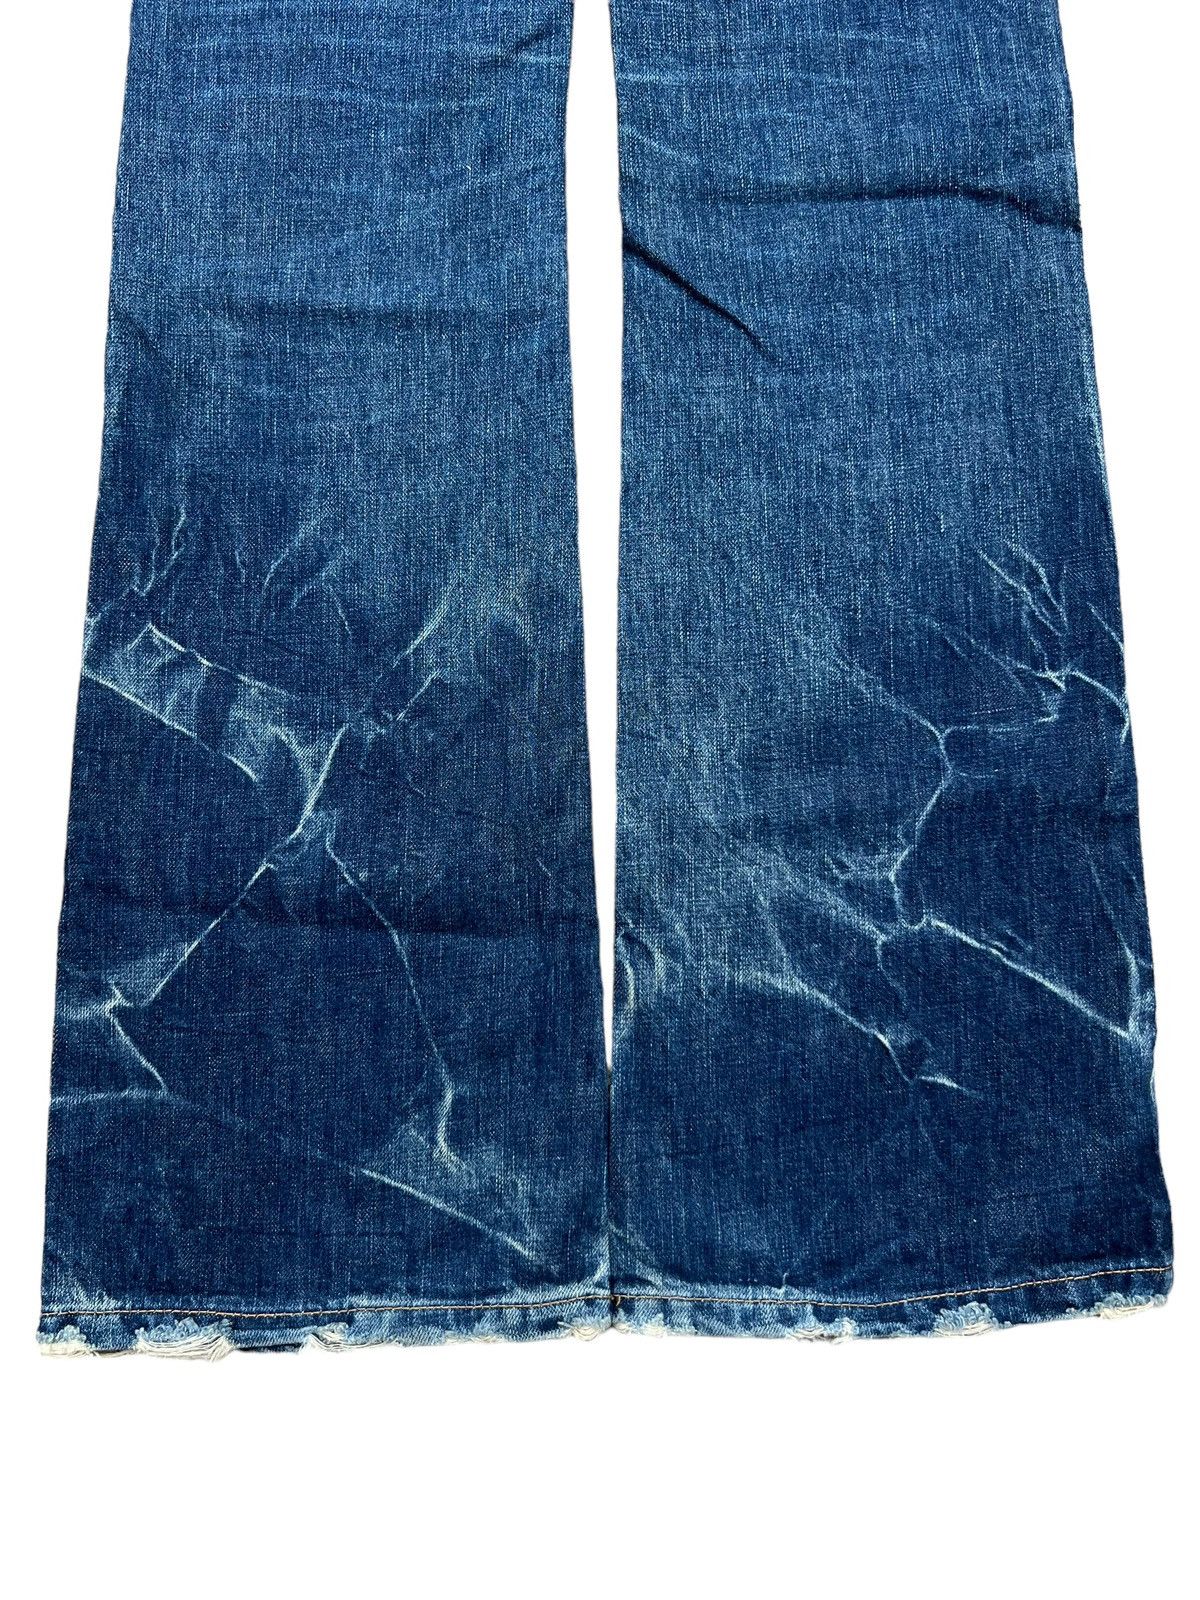 Hysteric Glamour Distressed Flare Punk Denim Jeans 31x32 - 6